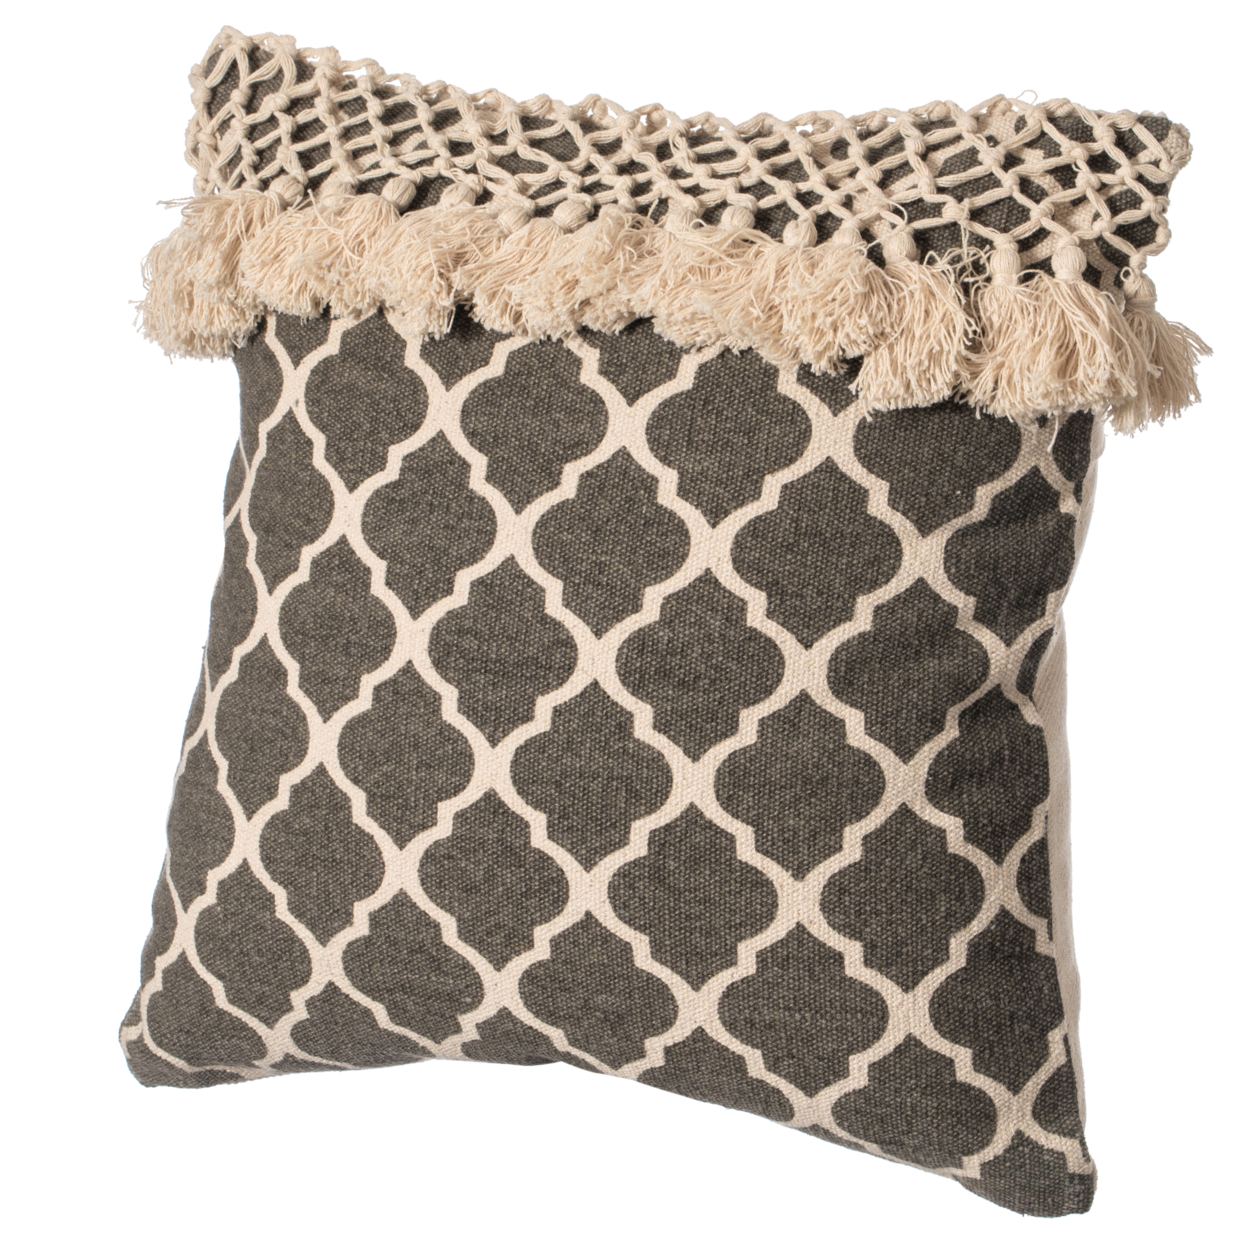 16 Handwoven Cotton Throw Pillow Cover With Ogee Pattern And Tasseled Top - Charcoal